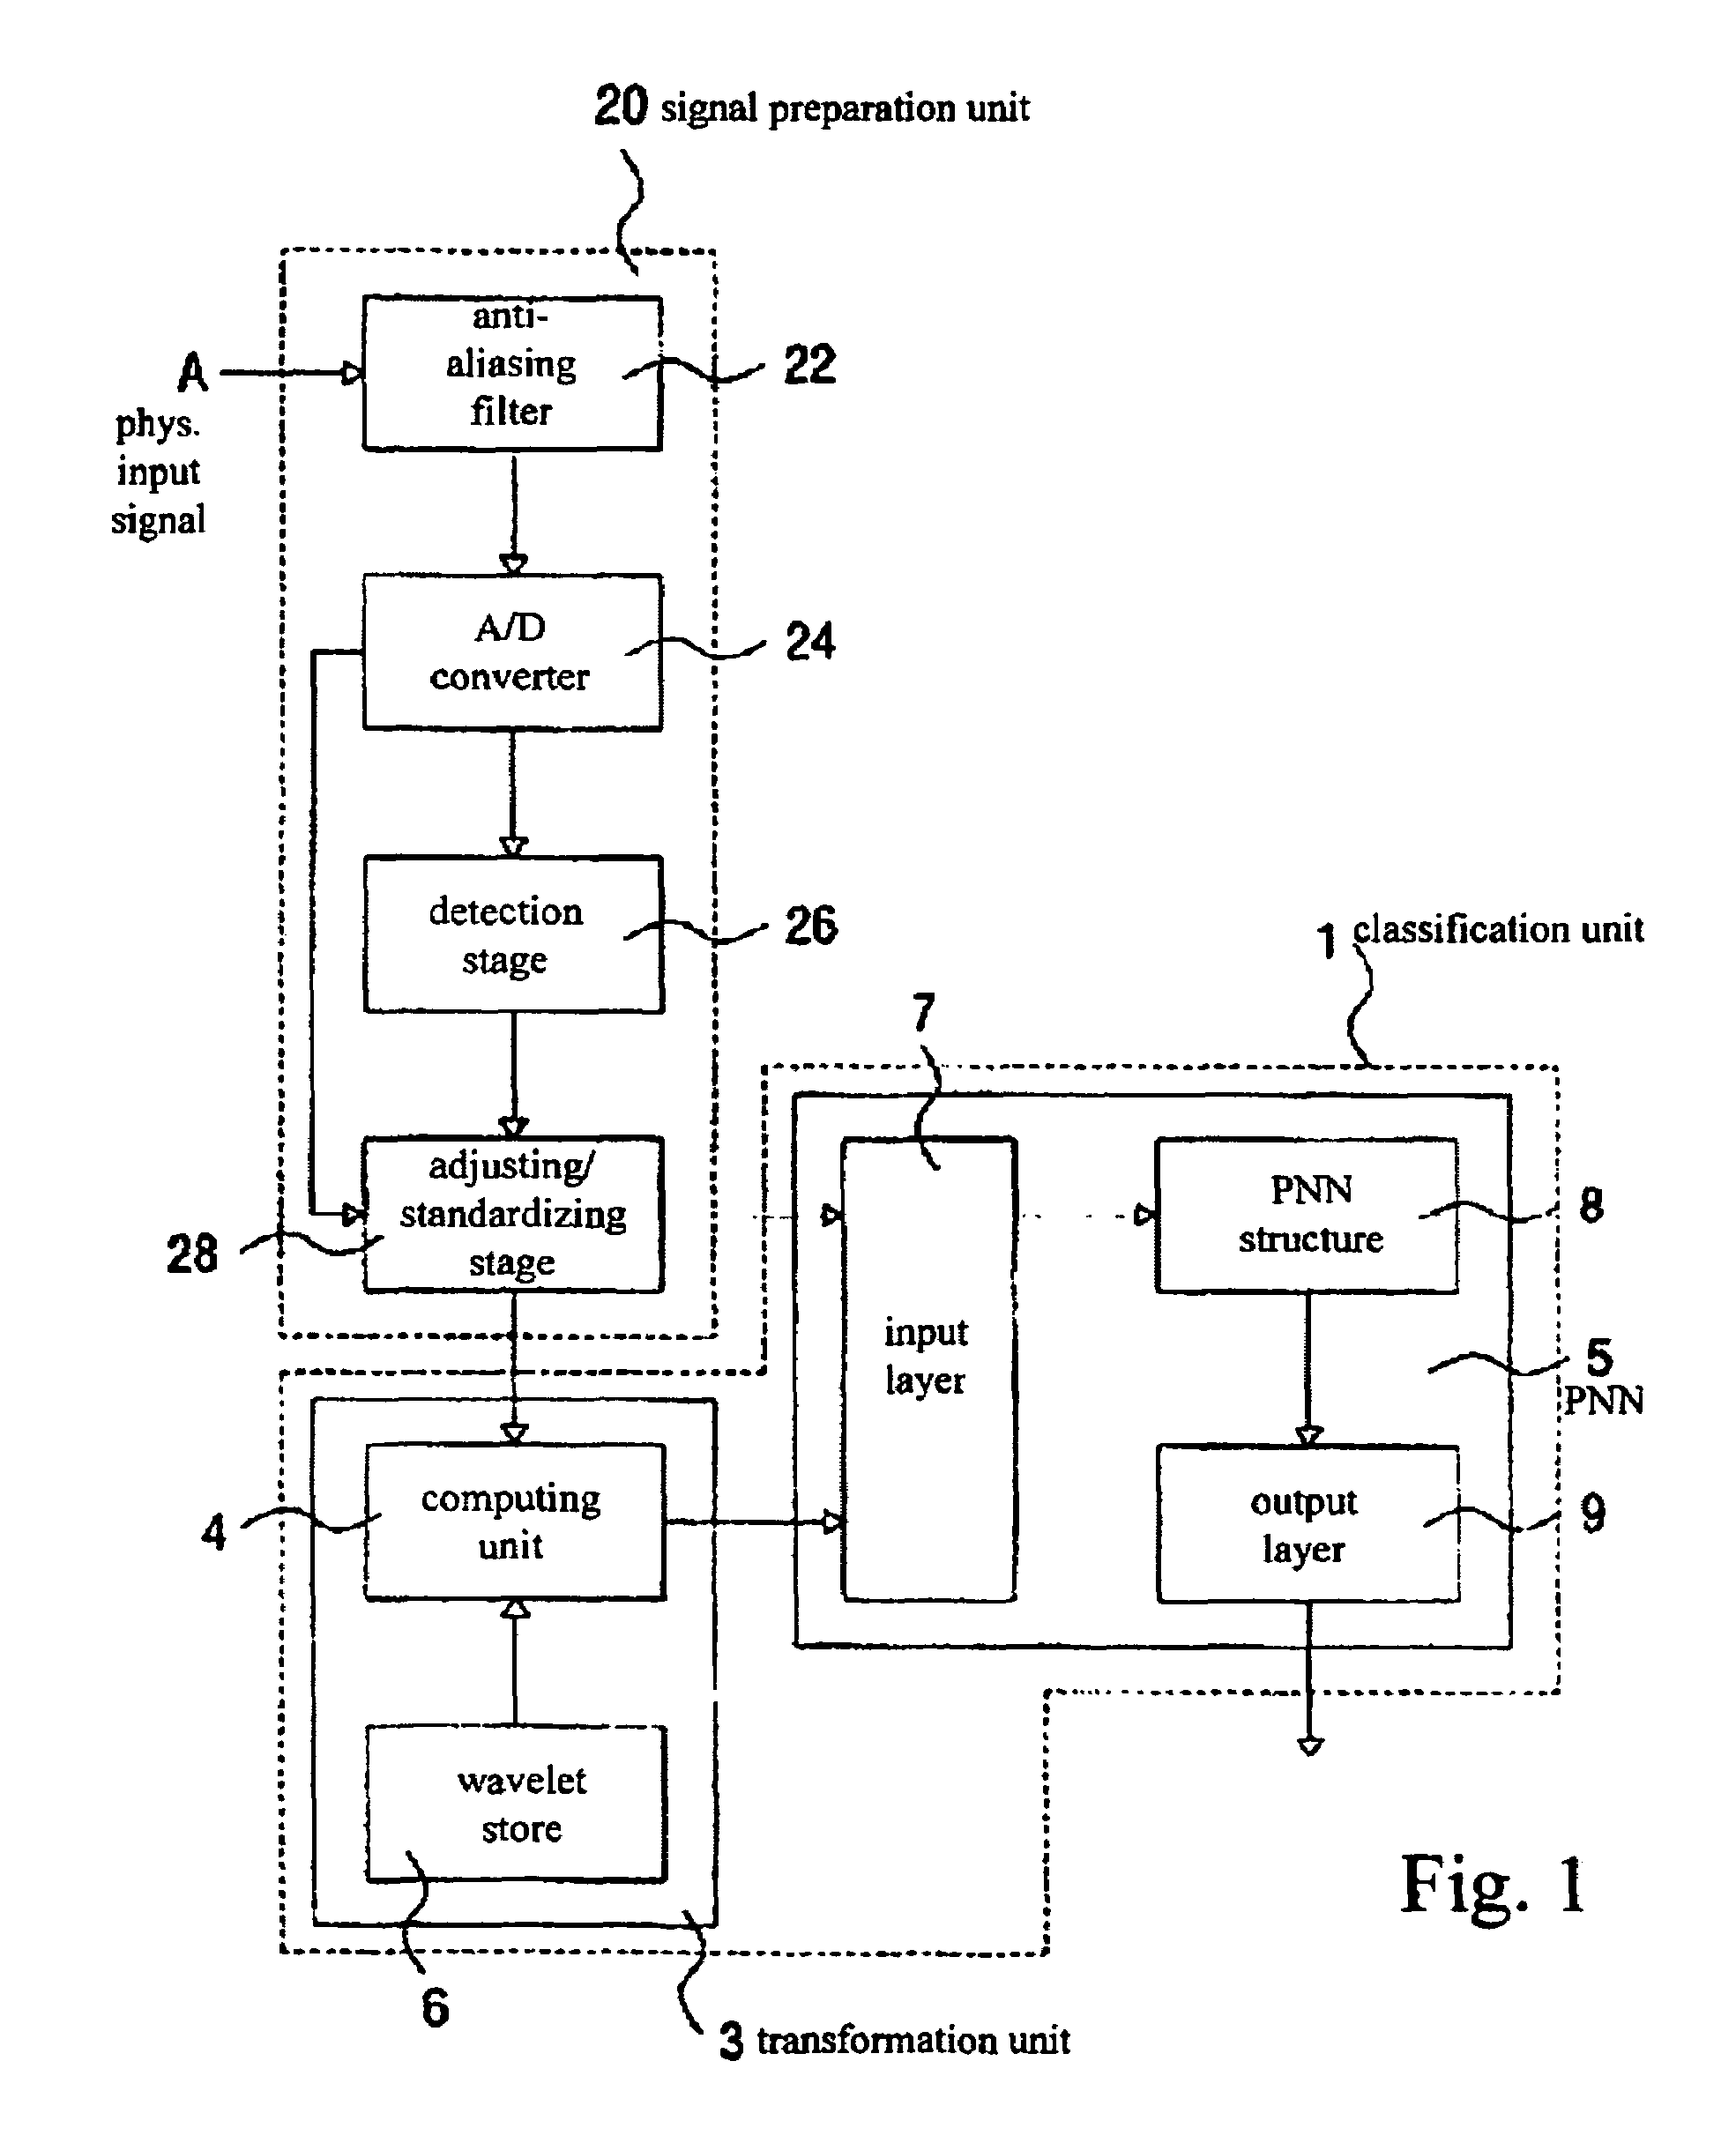 Apparatus for the classification of physiological events